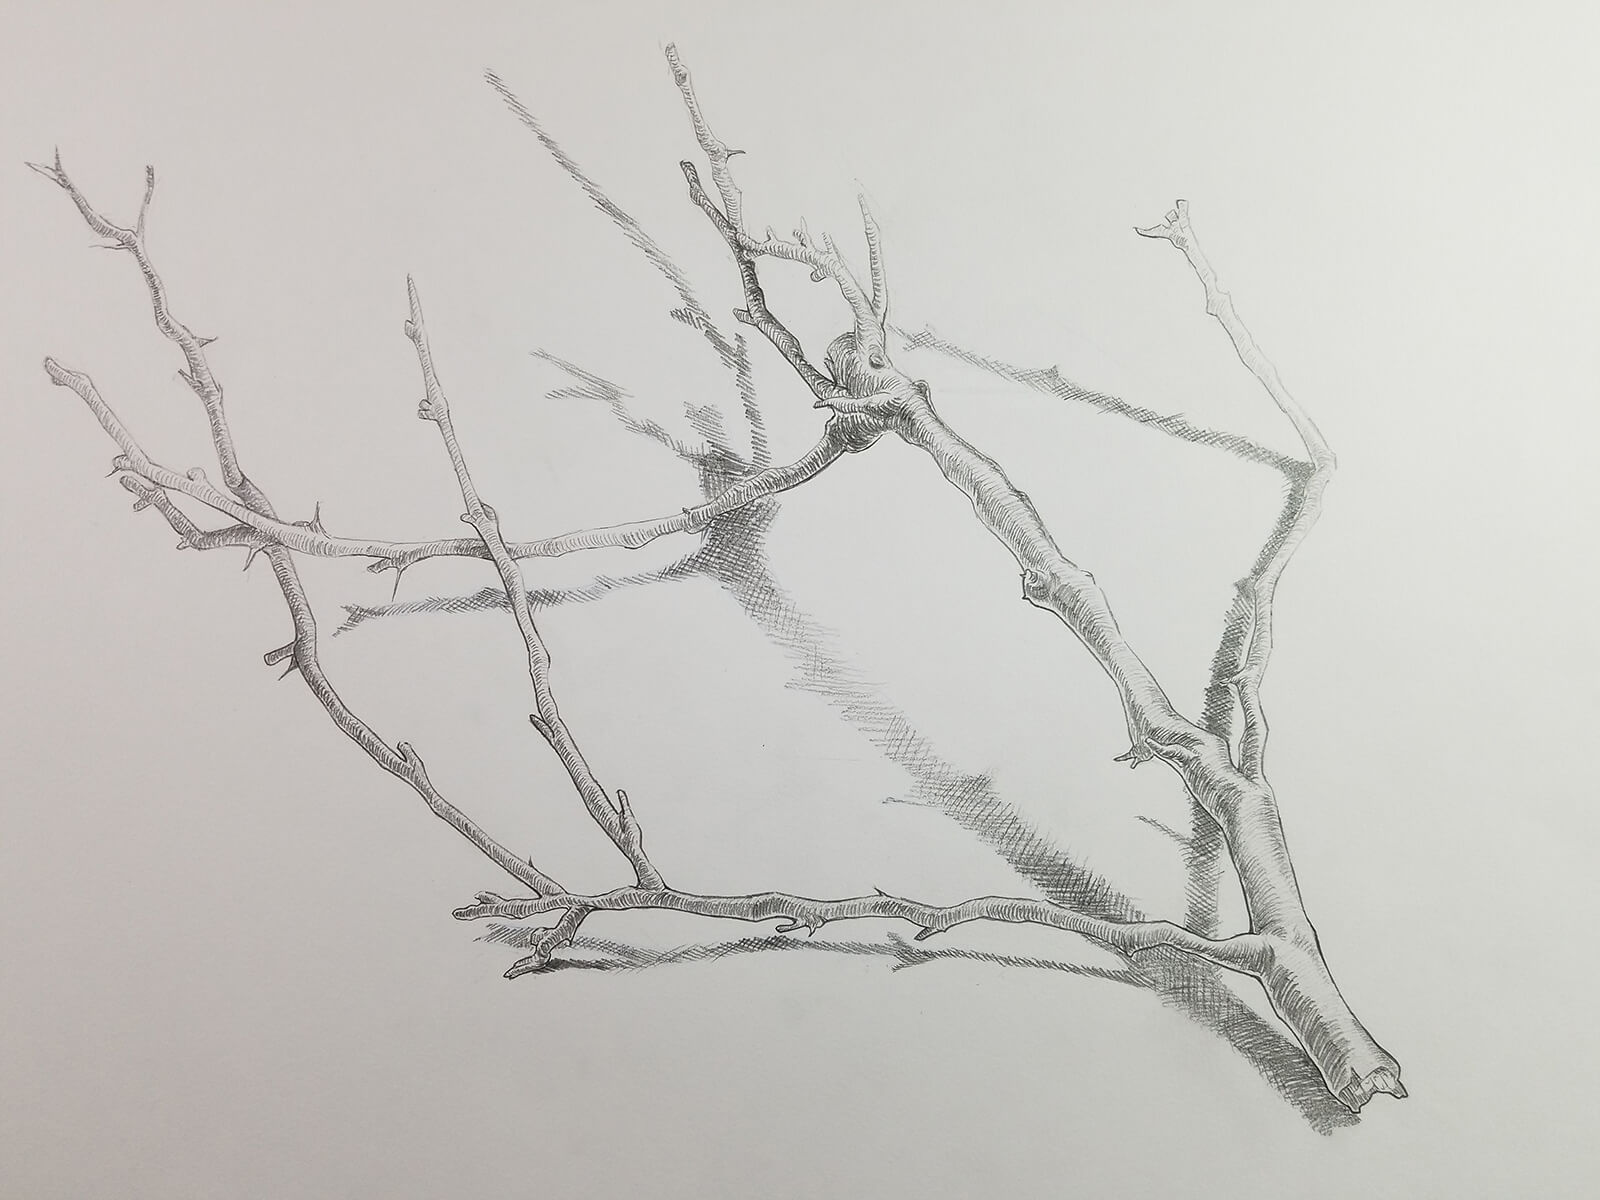 A detailed drawing of a tree branch